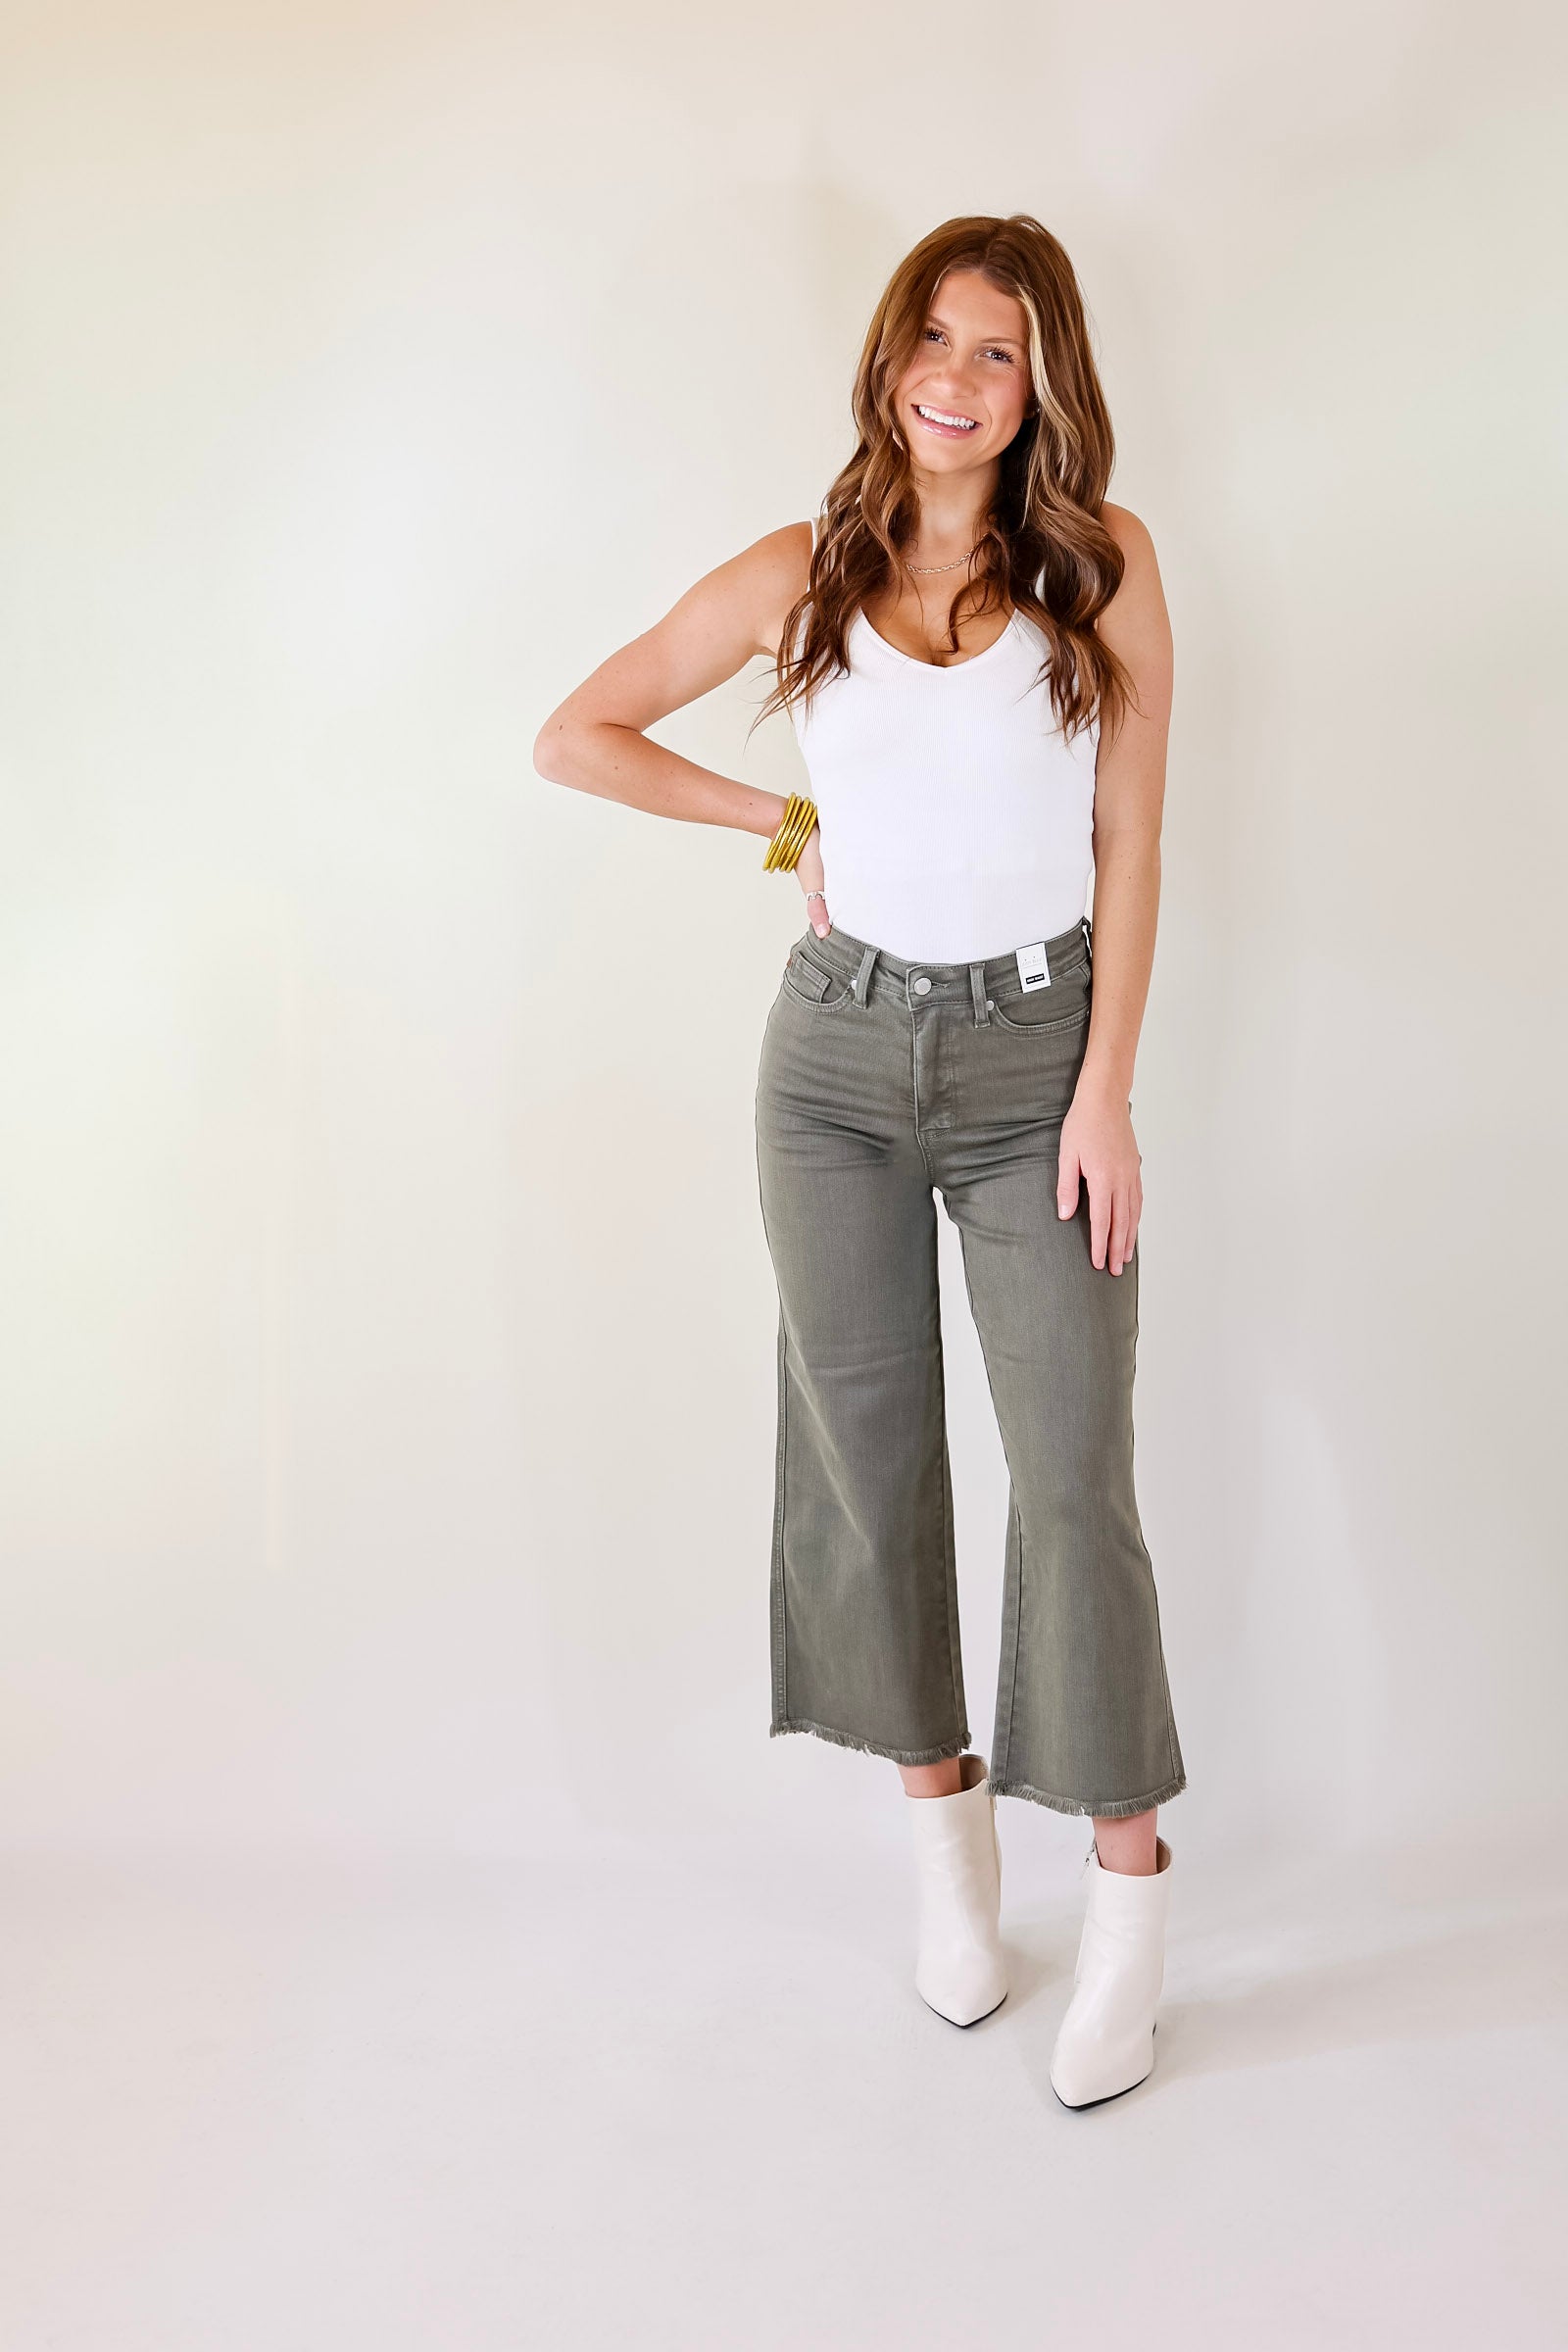 Judy Blue | Sign Me Up Tummy Control Cropped Wide Leg Jeans in Olive Green - Giddy Up Glamour Boutique